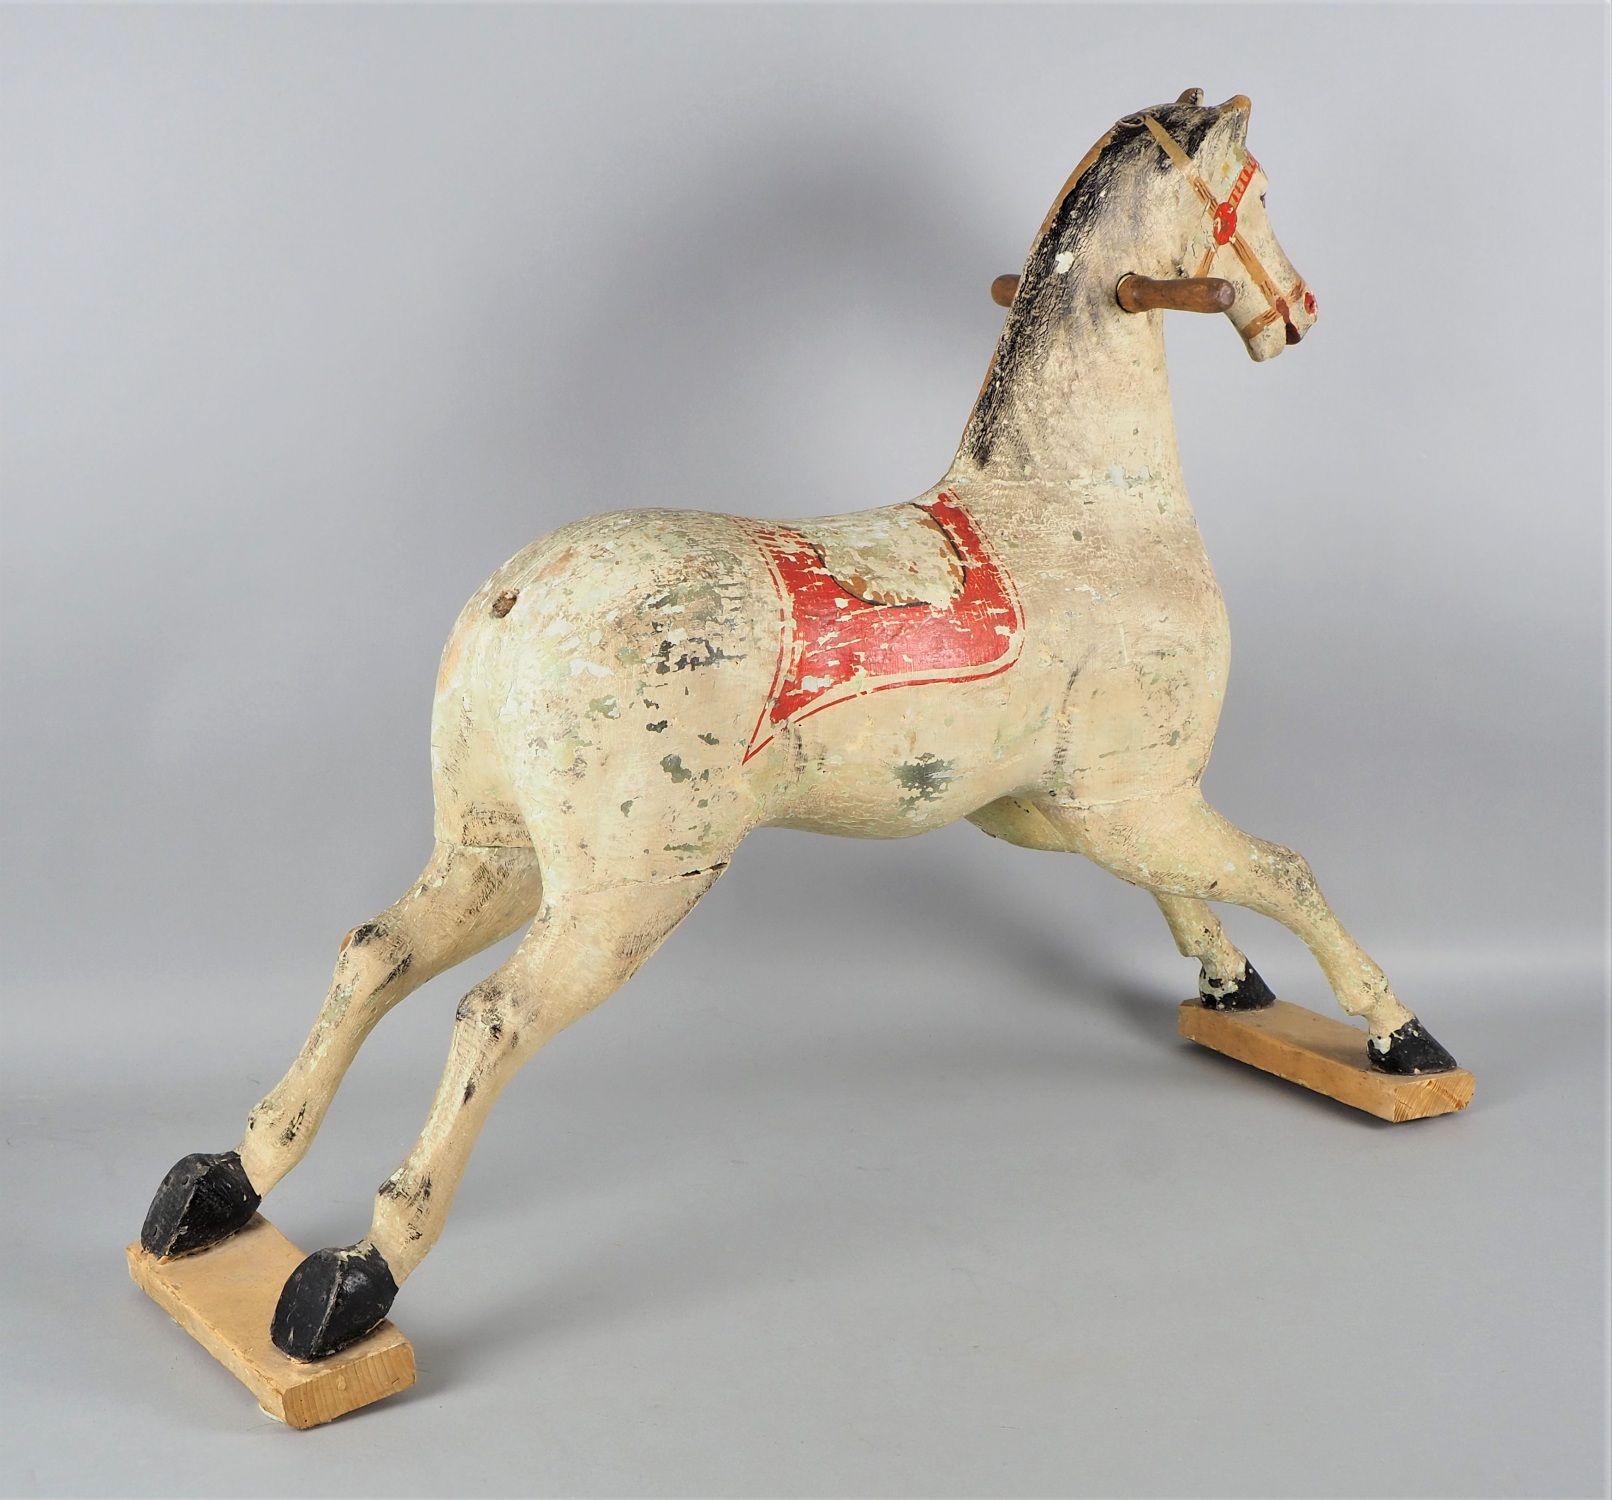 Wooden rocking horse or carousel horse, 20s/30s. - Image 2 of 3